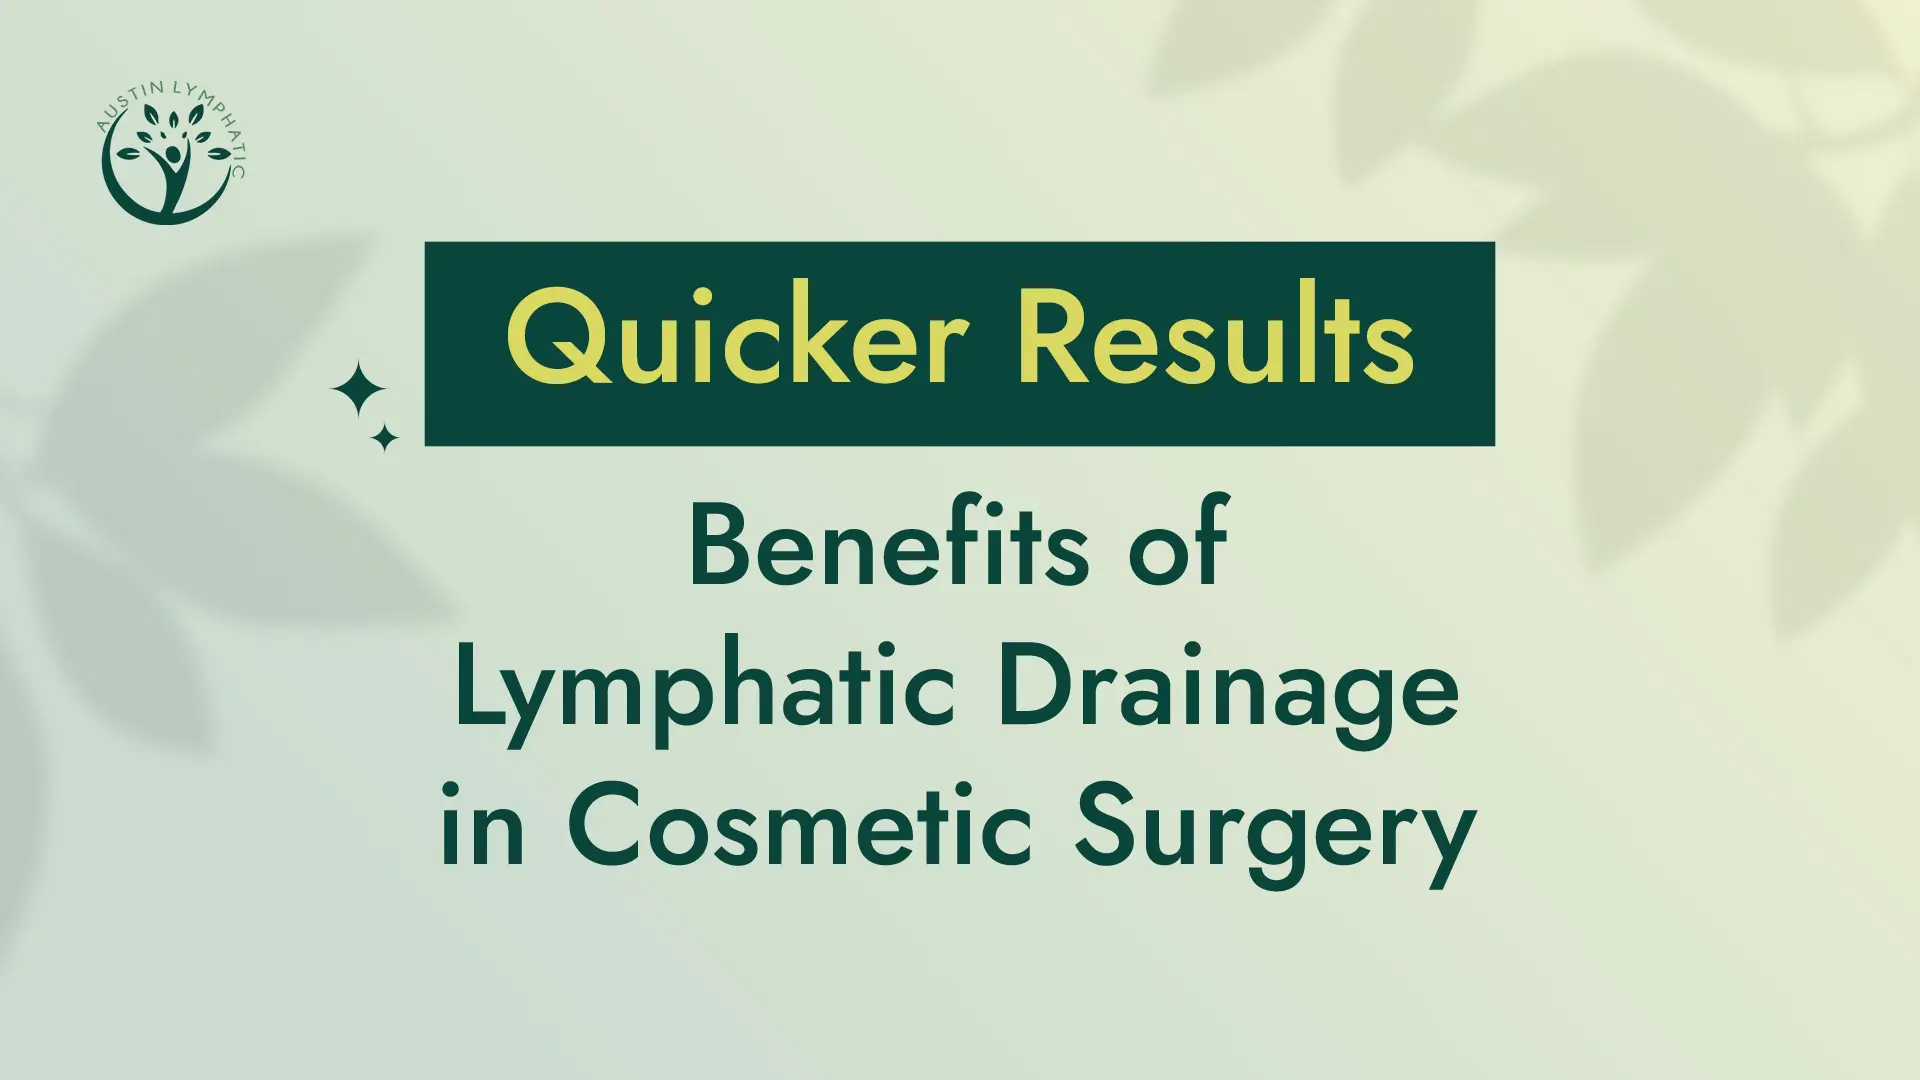 Quicker Results with Lymphatic Drainage